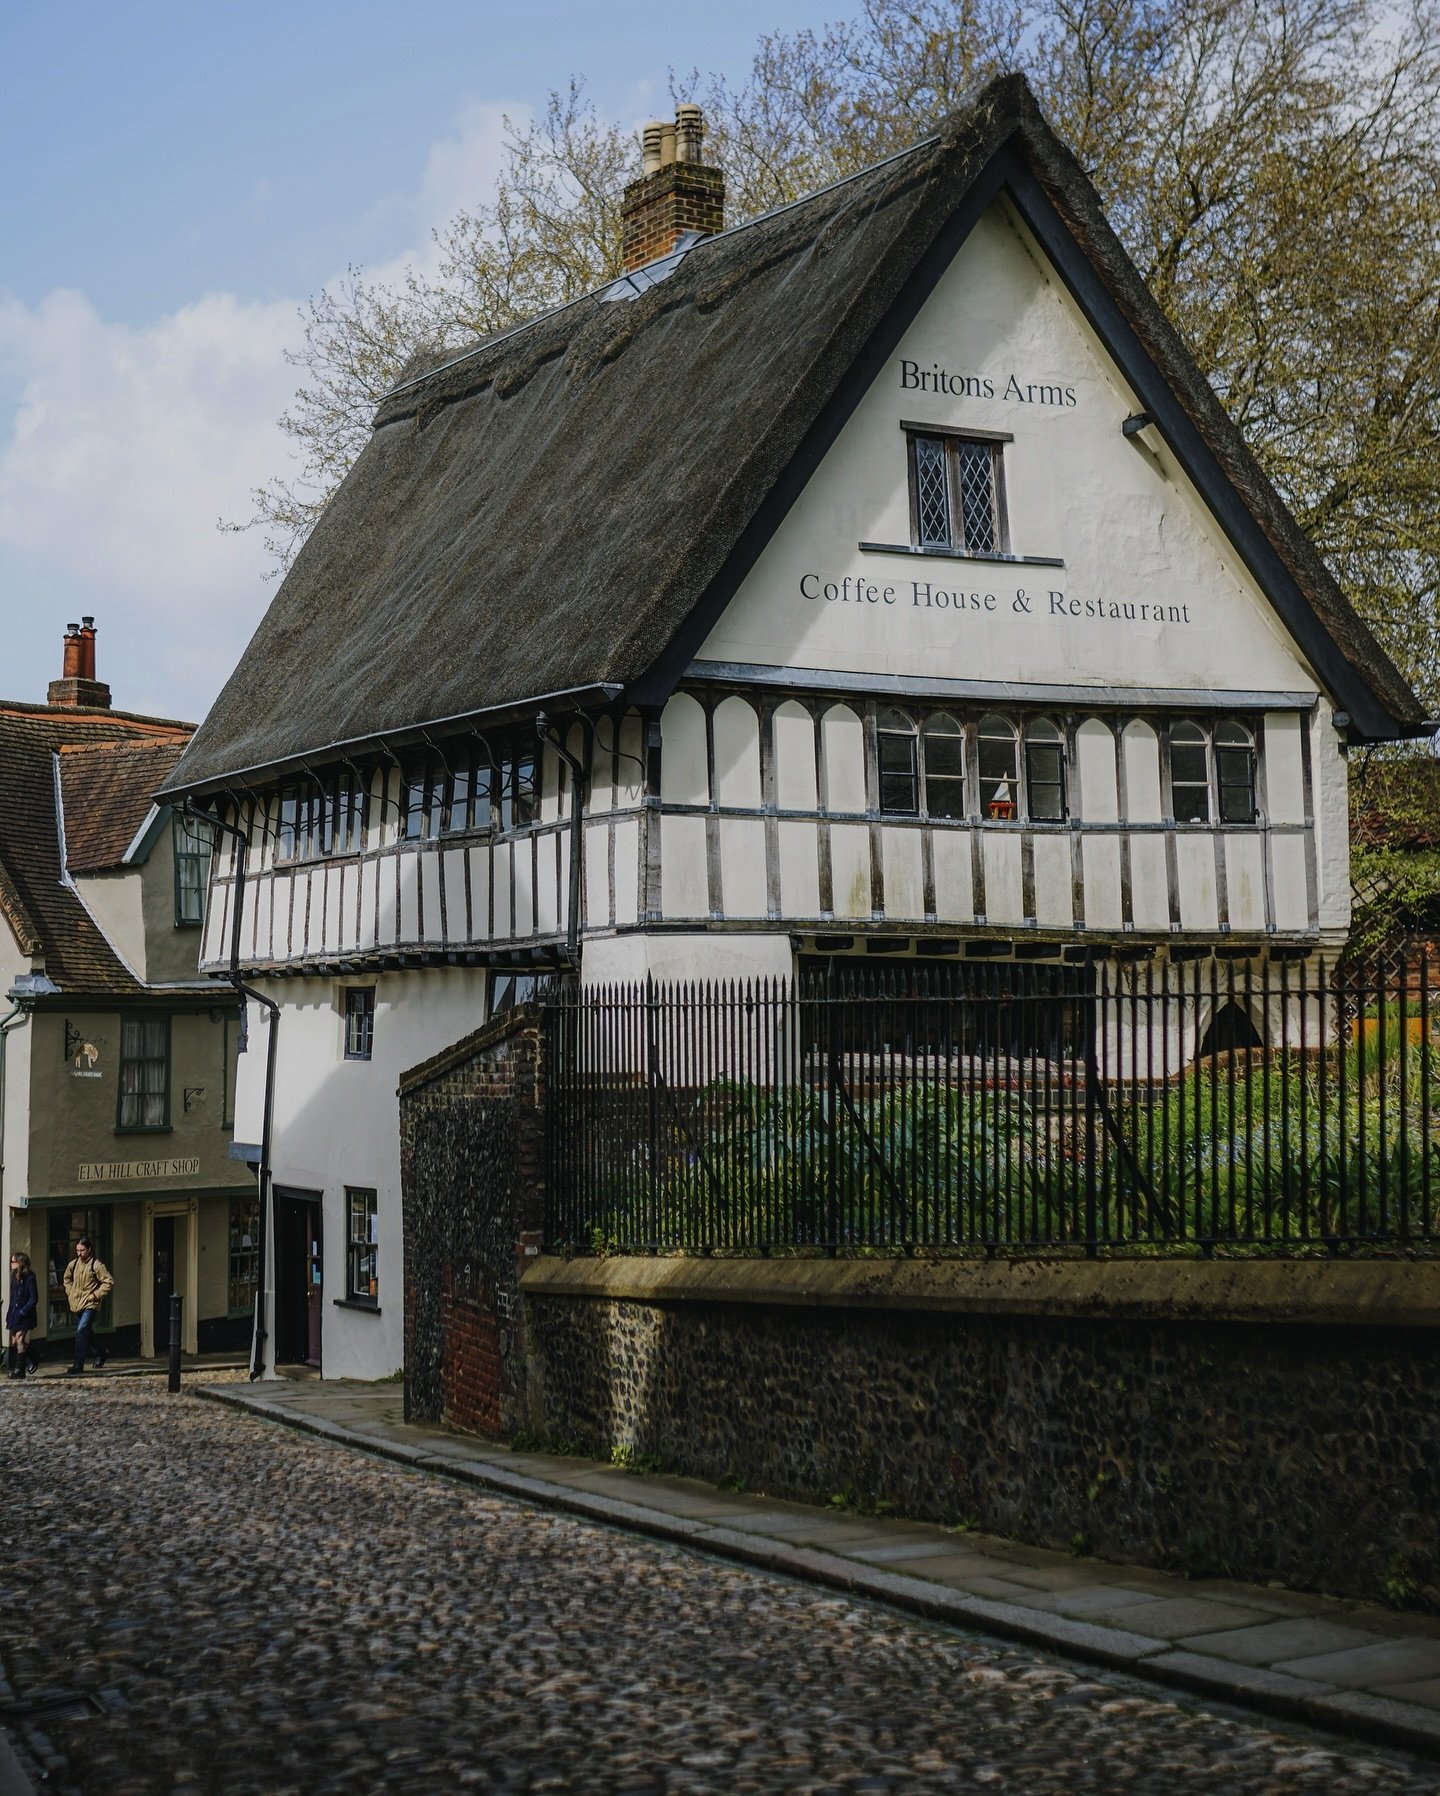 🏡The Britons Arms, a renowned historic structure in Norwich, England, is located in the charming Elm Hill area famous for its medieval architecture. Dating back to the 16th century, this building has served various roles throughout history, such as 